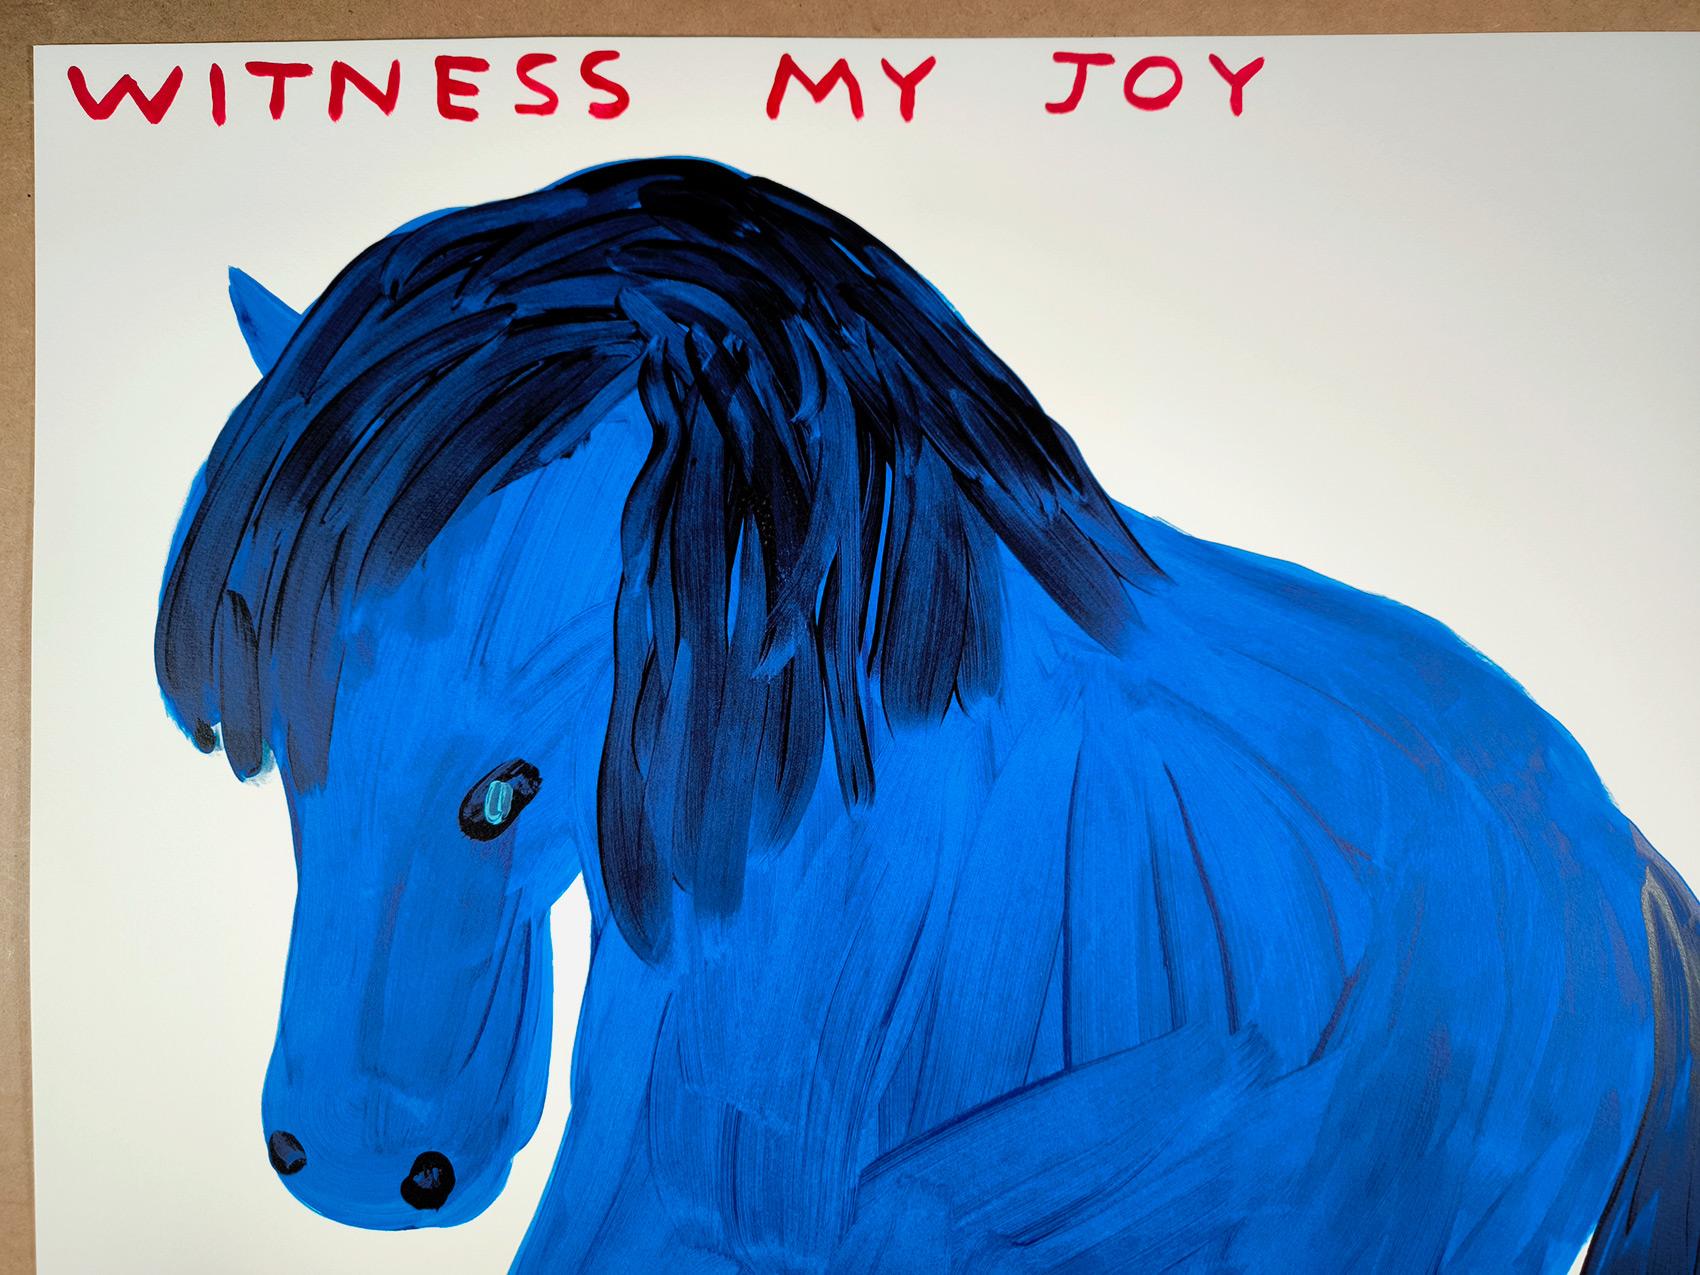 DAVID SHRIGLEY - WITNESS MY JOY
Date of creation: 2022
Medium: Screen print & varnish on Somerset paper
Edition: 125 + 12 AP
Size: 75 x 56 cm
Condition: Brand new, inside its custom packaging
Observations: This is a 16 colour screenprint with a two